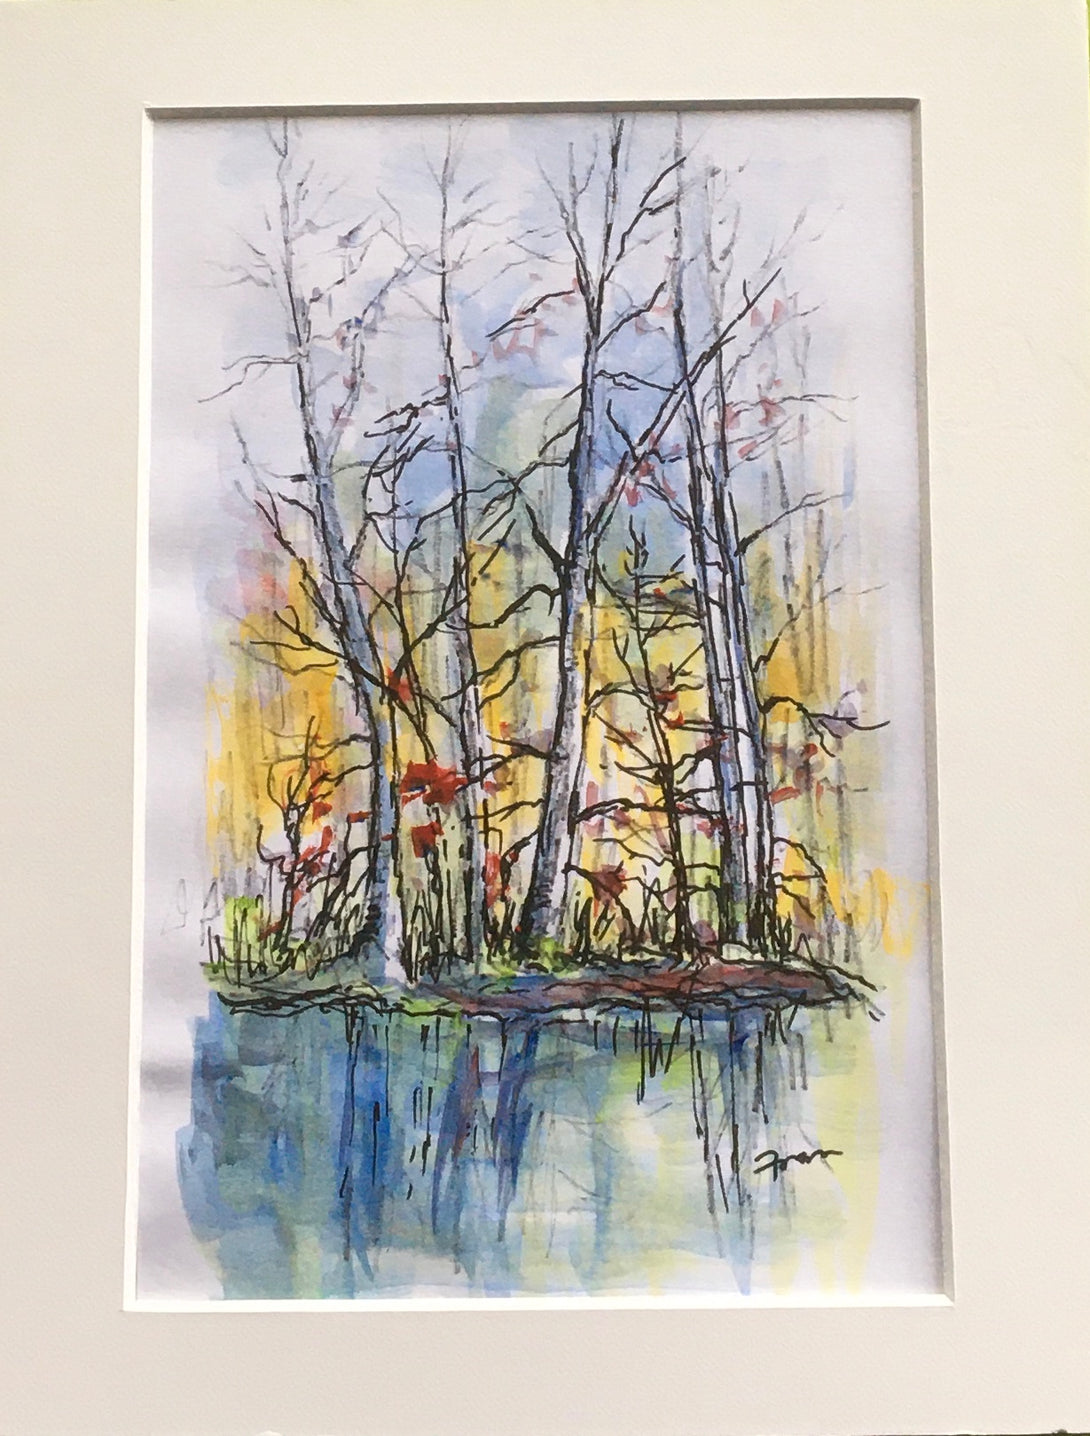 Fran Renwick - Watercolour painting -Trees & Water, matted, unframed by Fran Renwick - McMillan Arts Centre - Vancouver Island Art Gallery